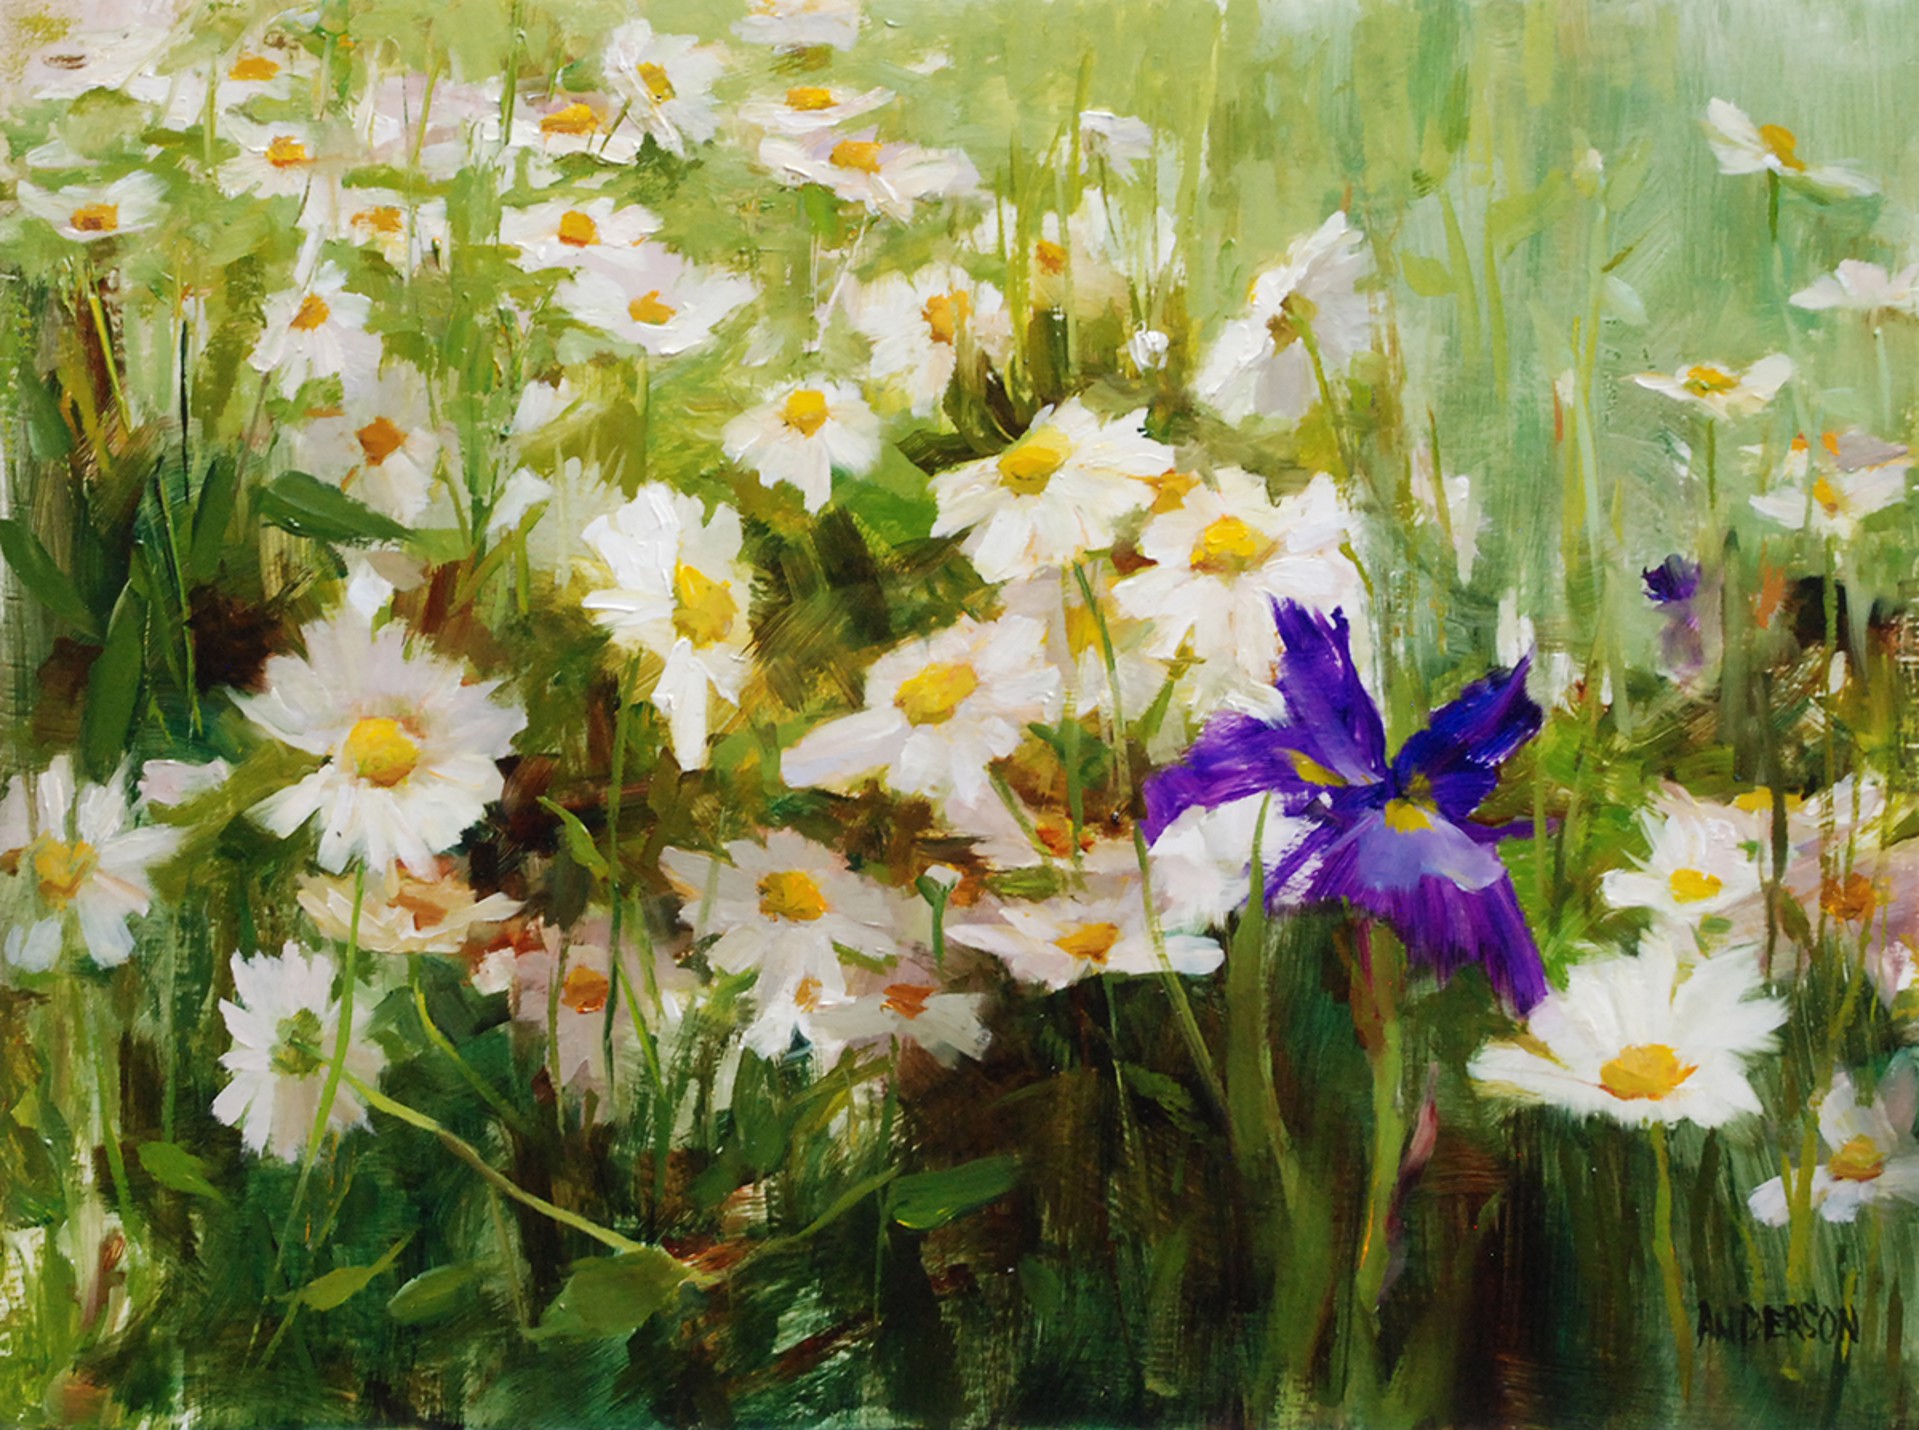 Purple Iris and Daisies by Kathy Anderson